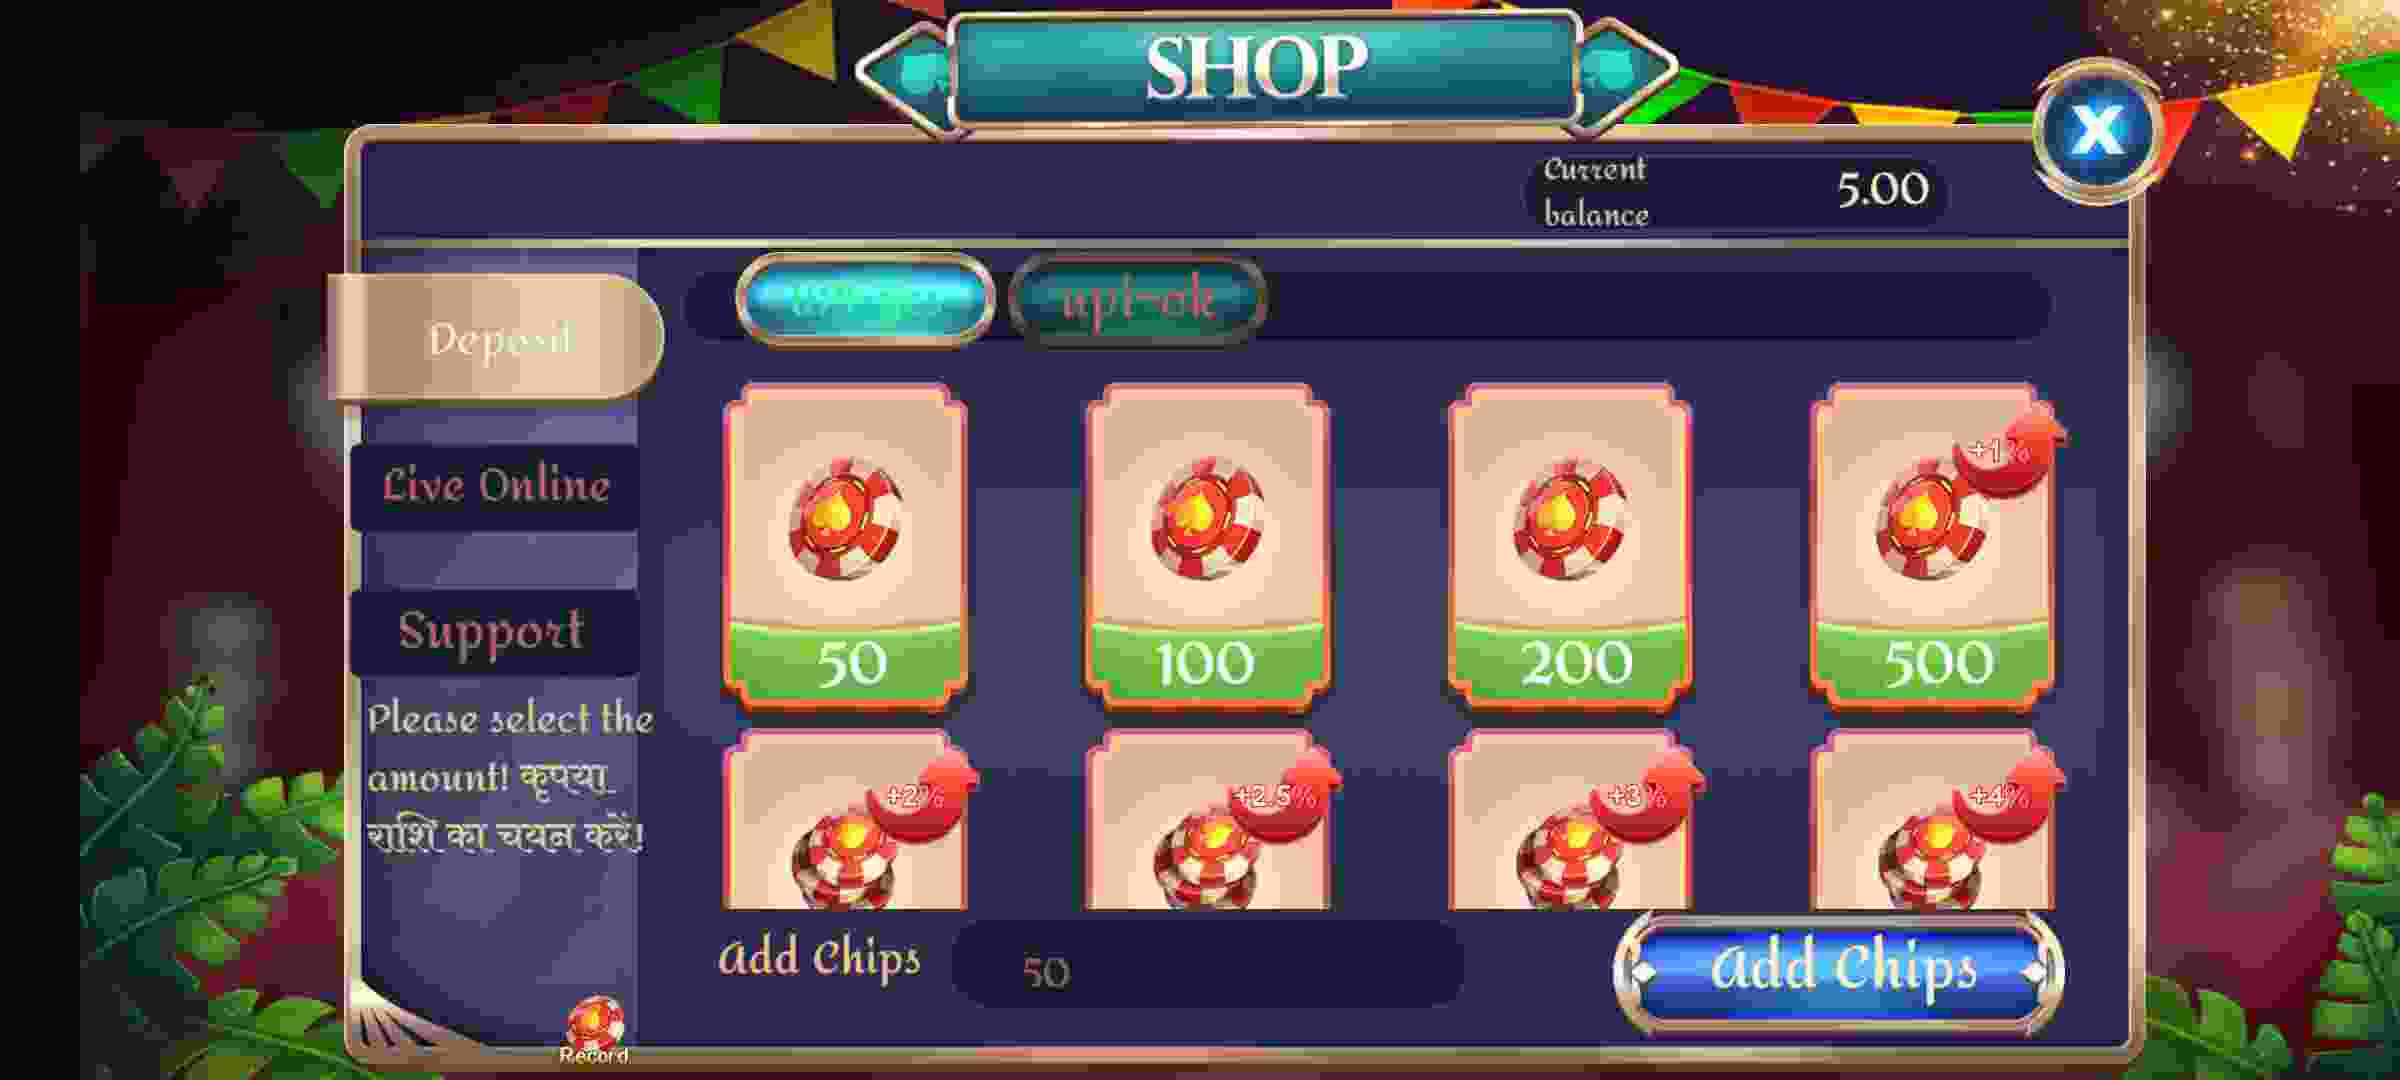 How To Buy chips In Teen Patti Sea Apk